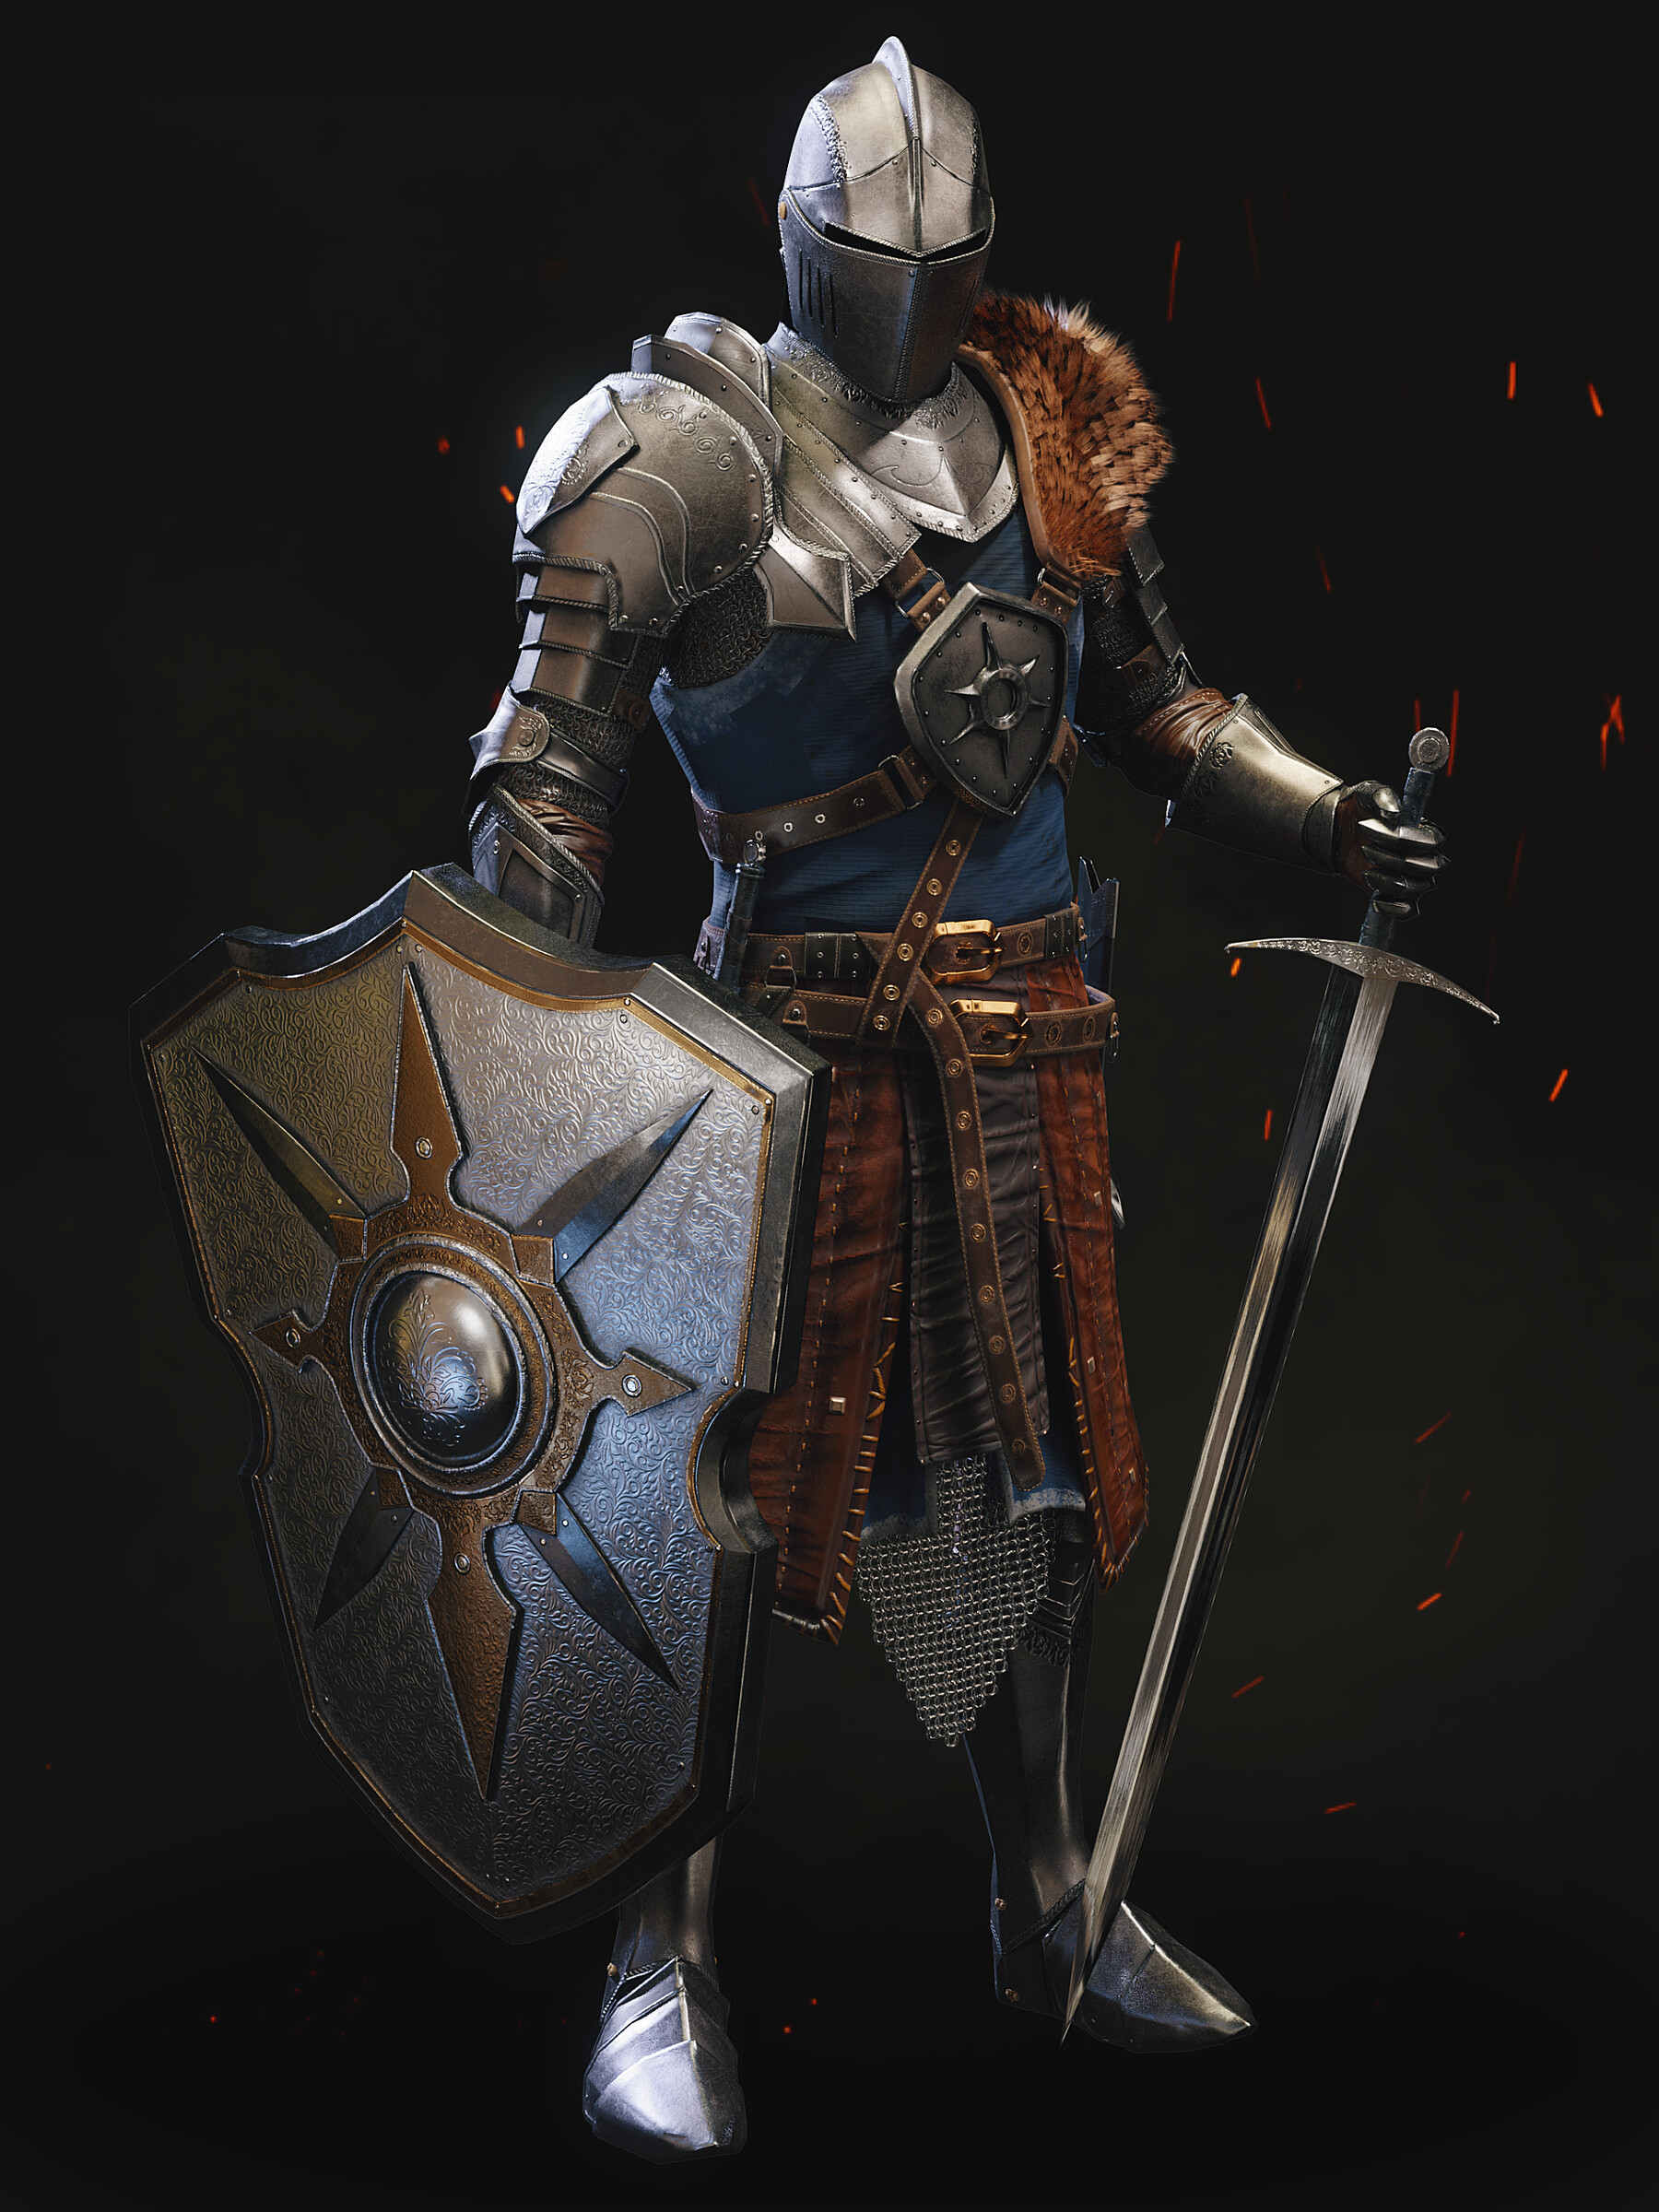 ArtStation - 3D Medieval Knight with Armor and Fur | Game Assets